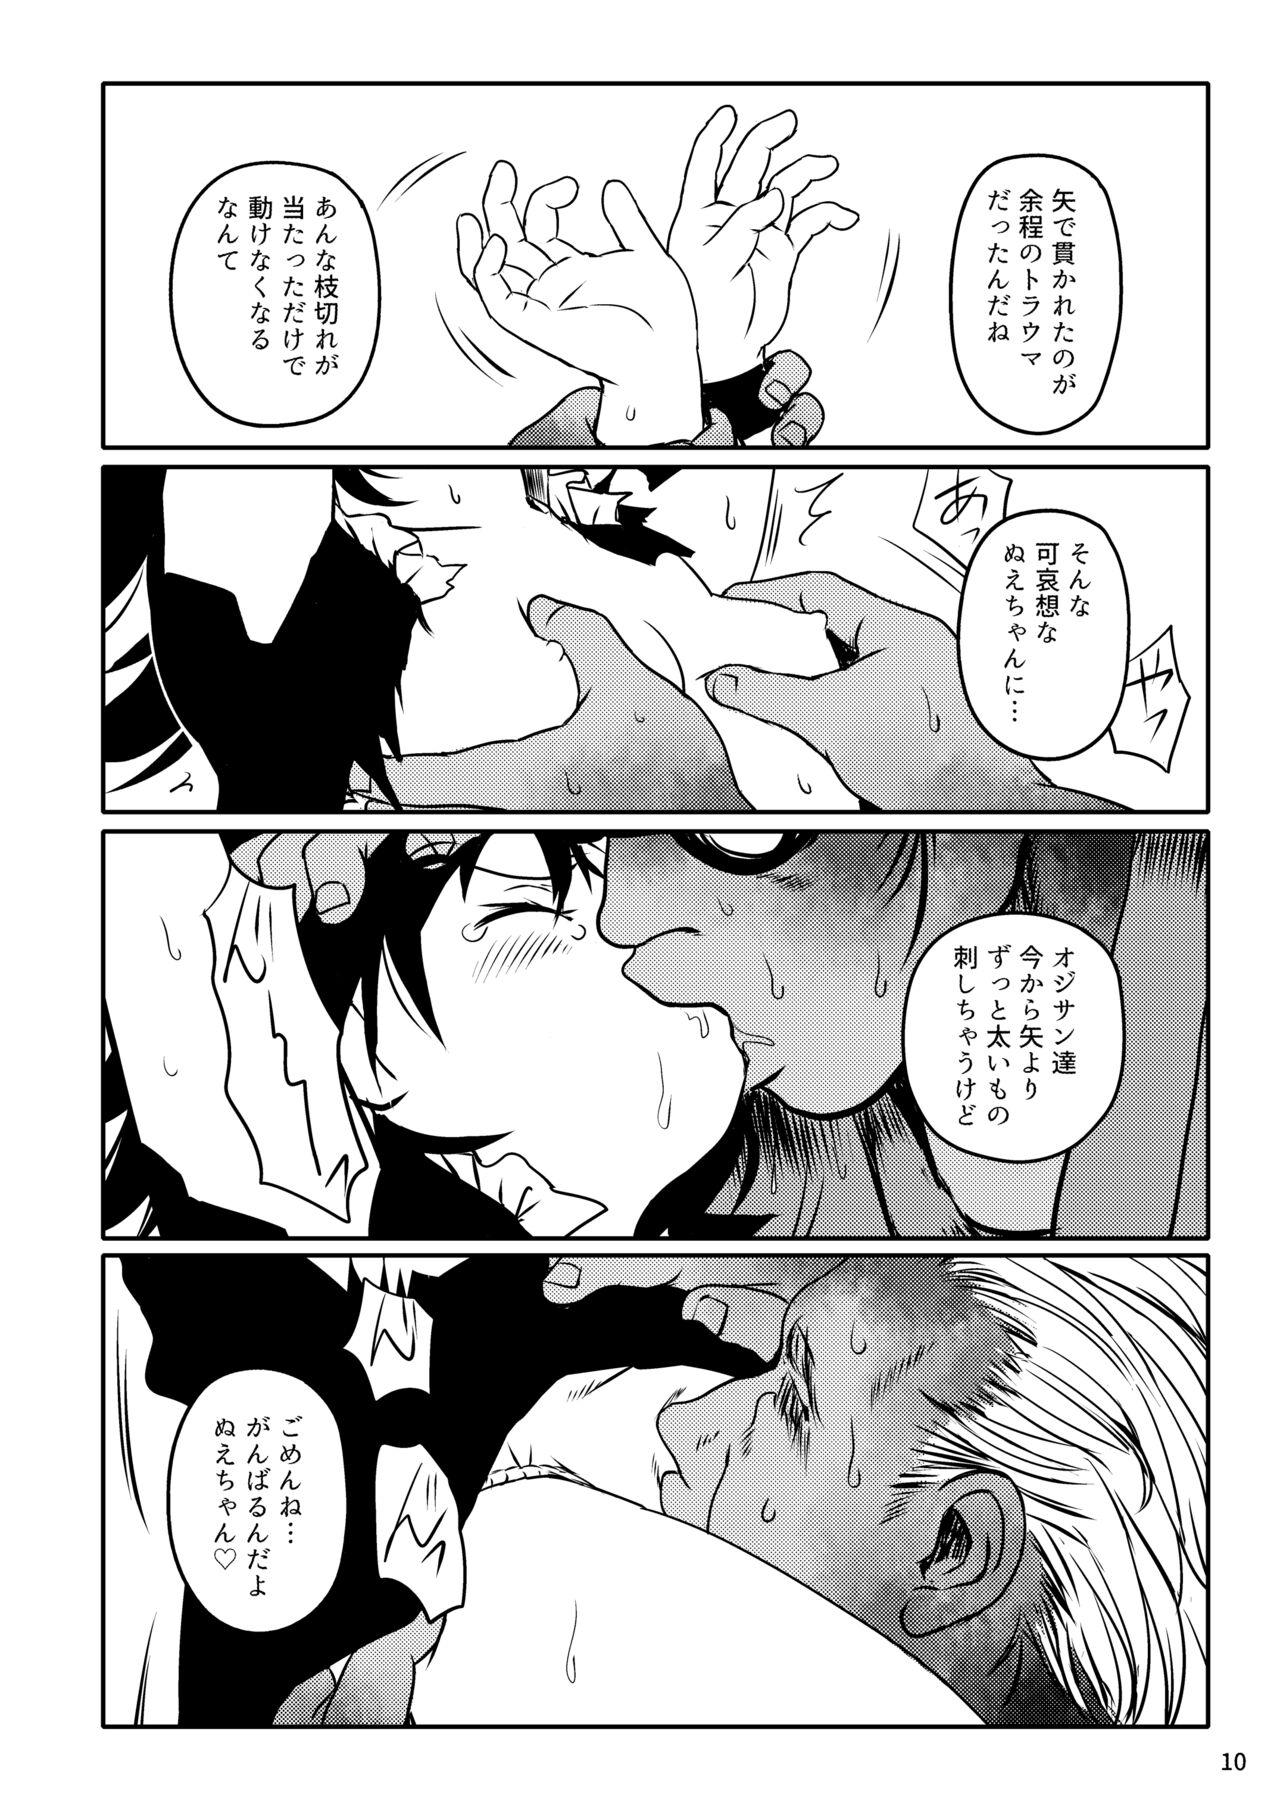 Best Blowjobs Ever Trauma! Nue-chan! - Touhou project Glamcore - Page 10